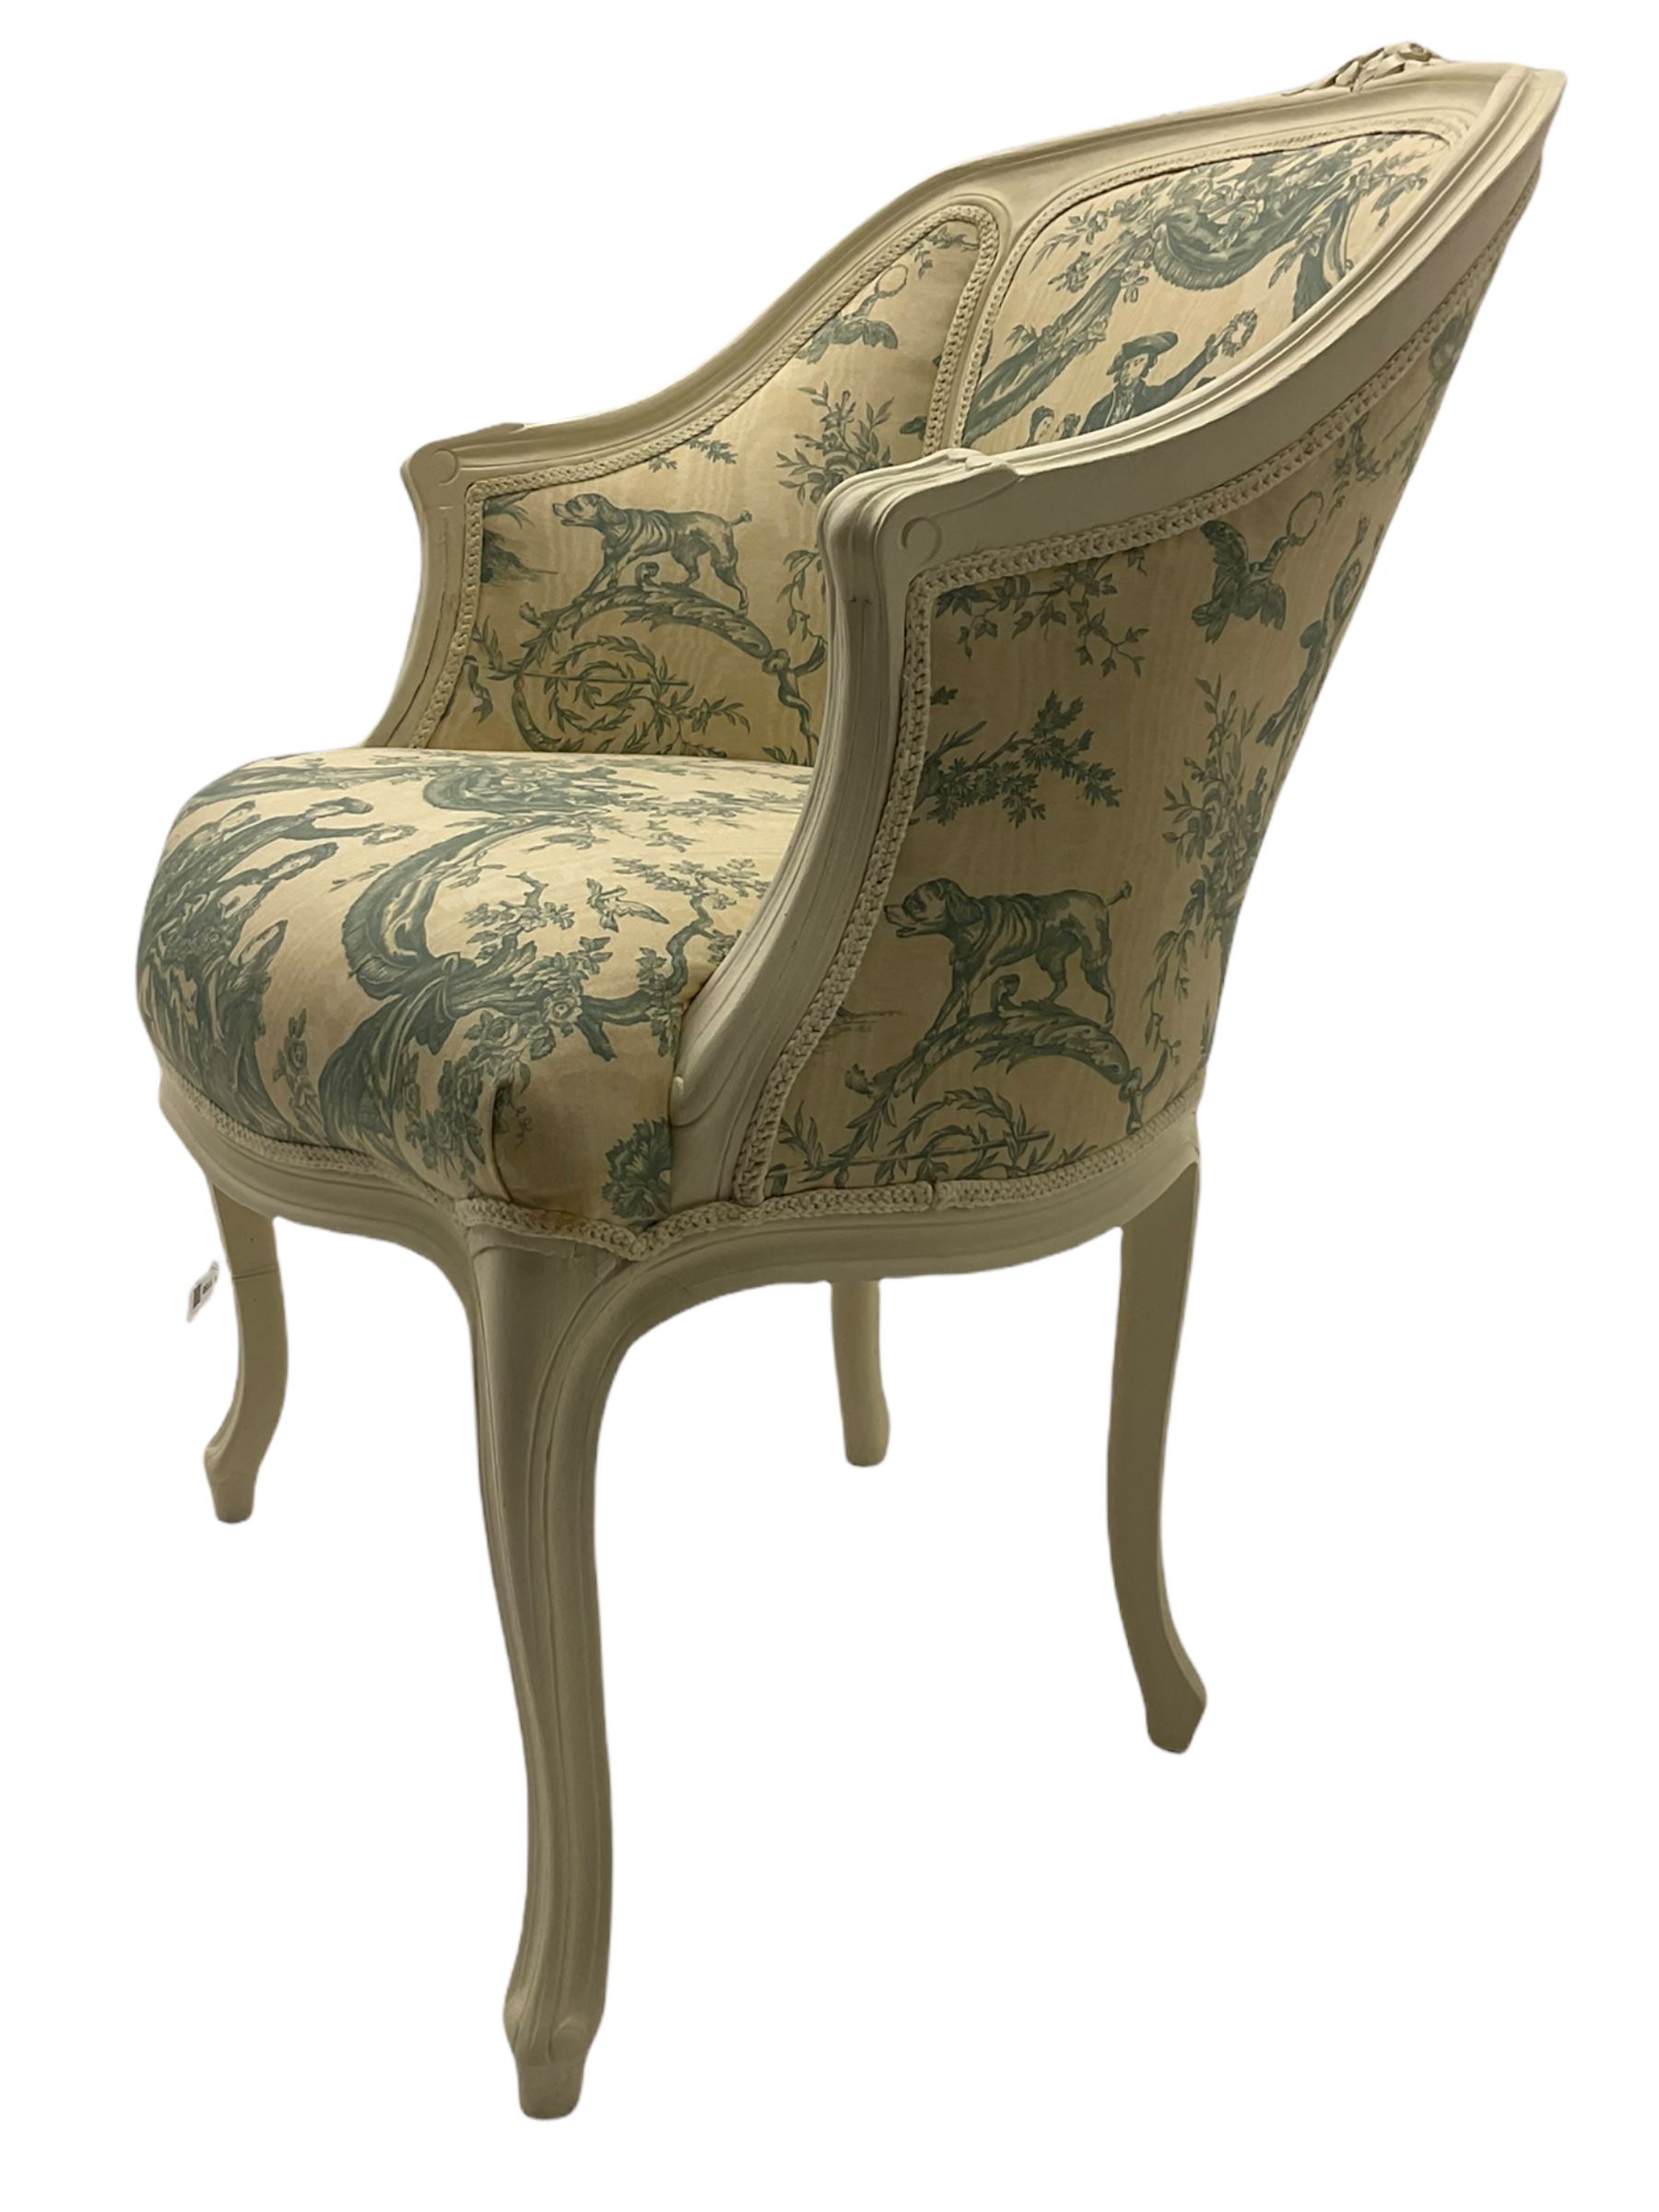 French style cream painted armchair - Image 2 of 3